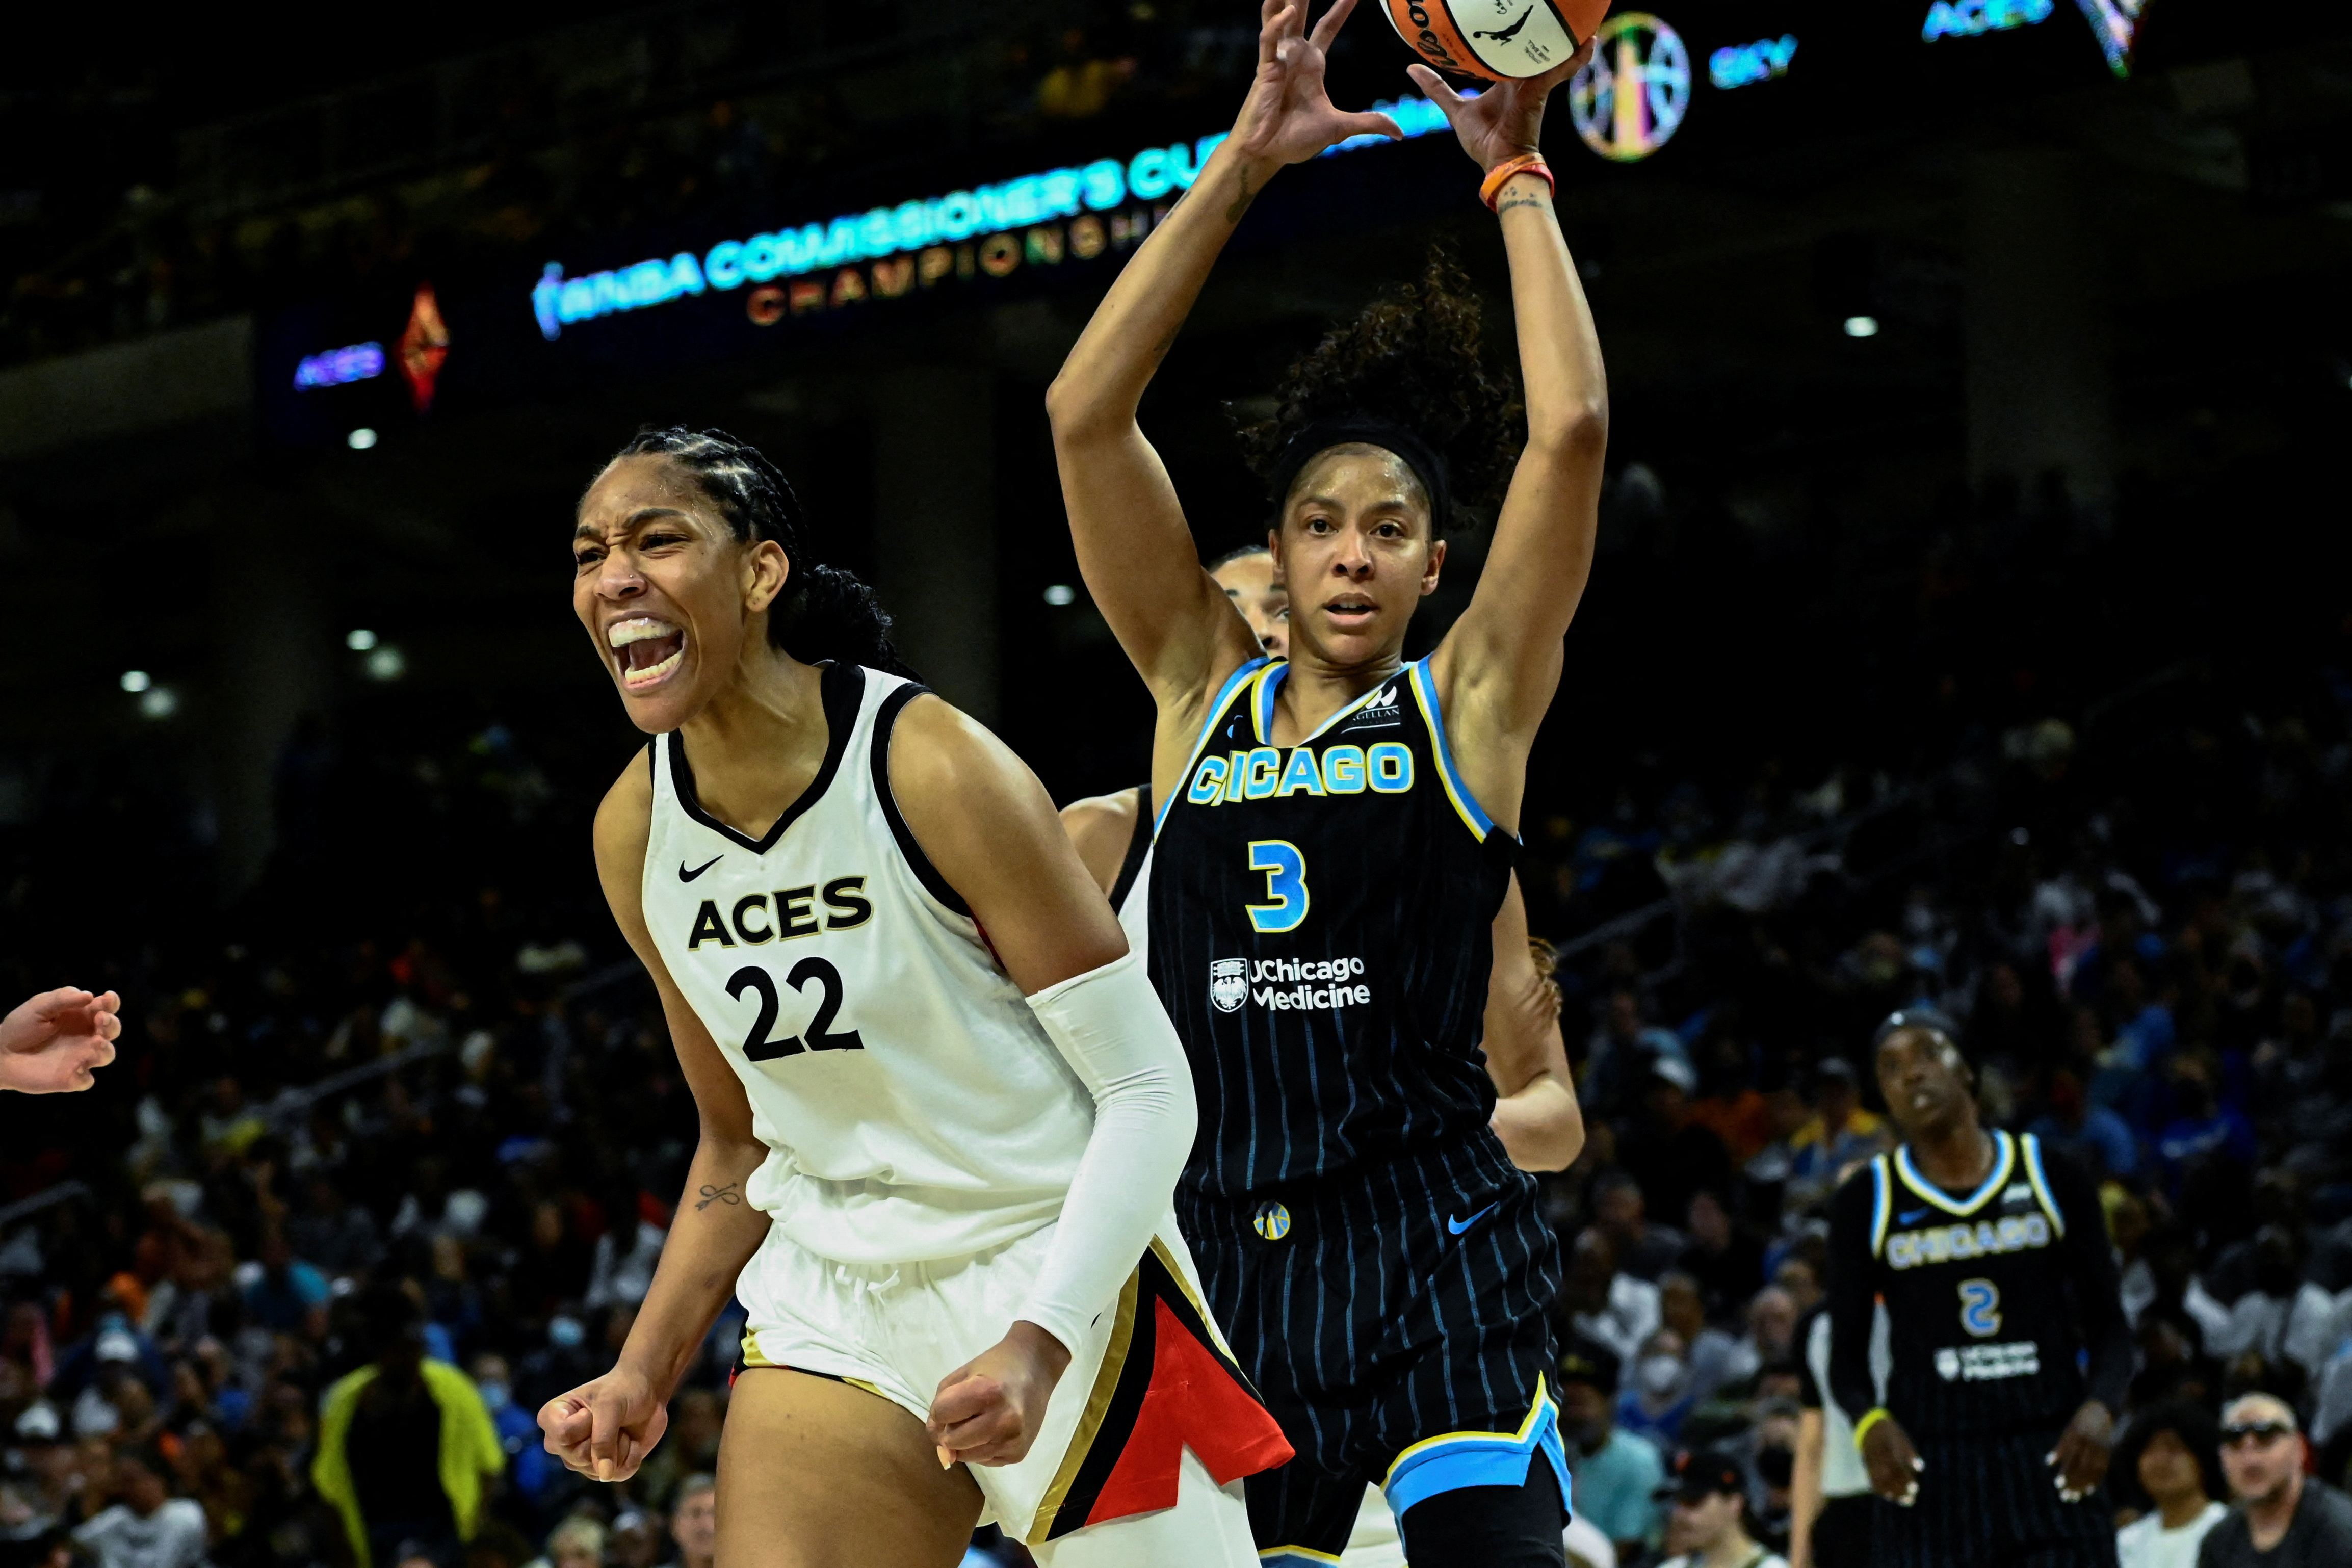 FILE PHOTO: Jul 26, 2022; Chicago, IL, USA;  Las Vegas Aces forward A'ja Wilson (22) yells after scoring against Chicago Sky forward Candace Parker (3) during the second half of the Commissioners Cup-Championships at Wintrust Arena. Mandatory Credit: Matt Marton-USA TODAY Sports/File Photo